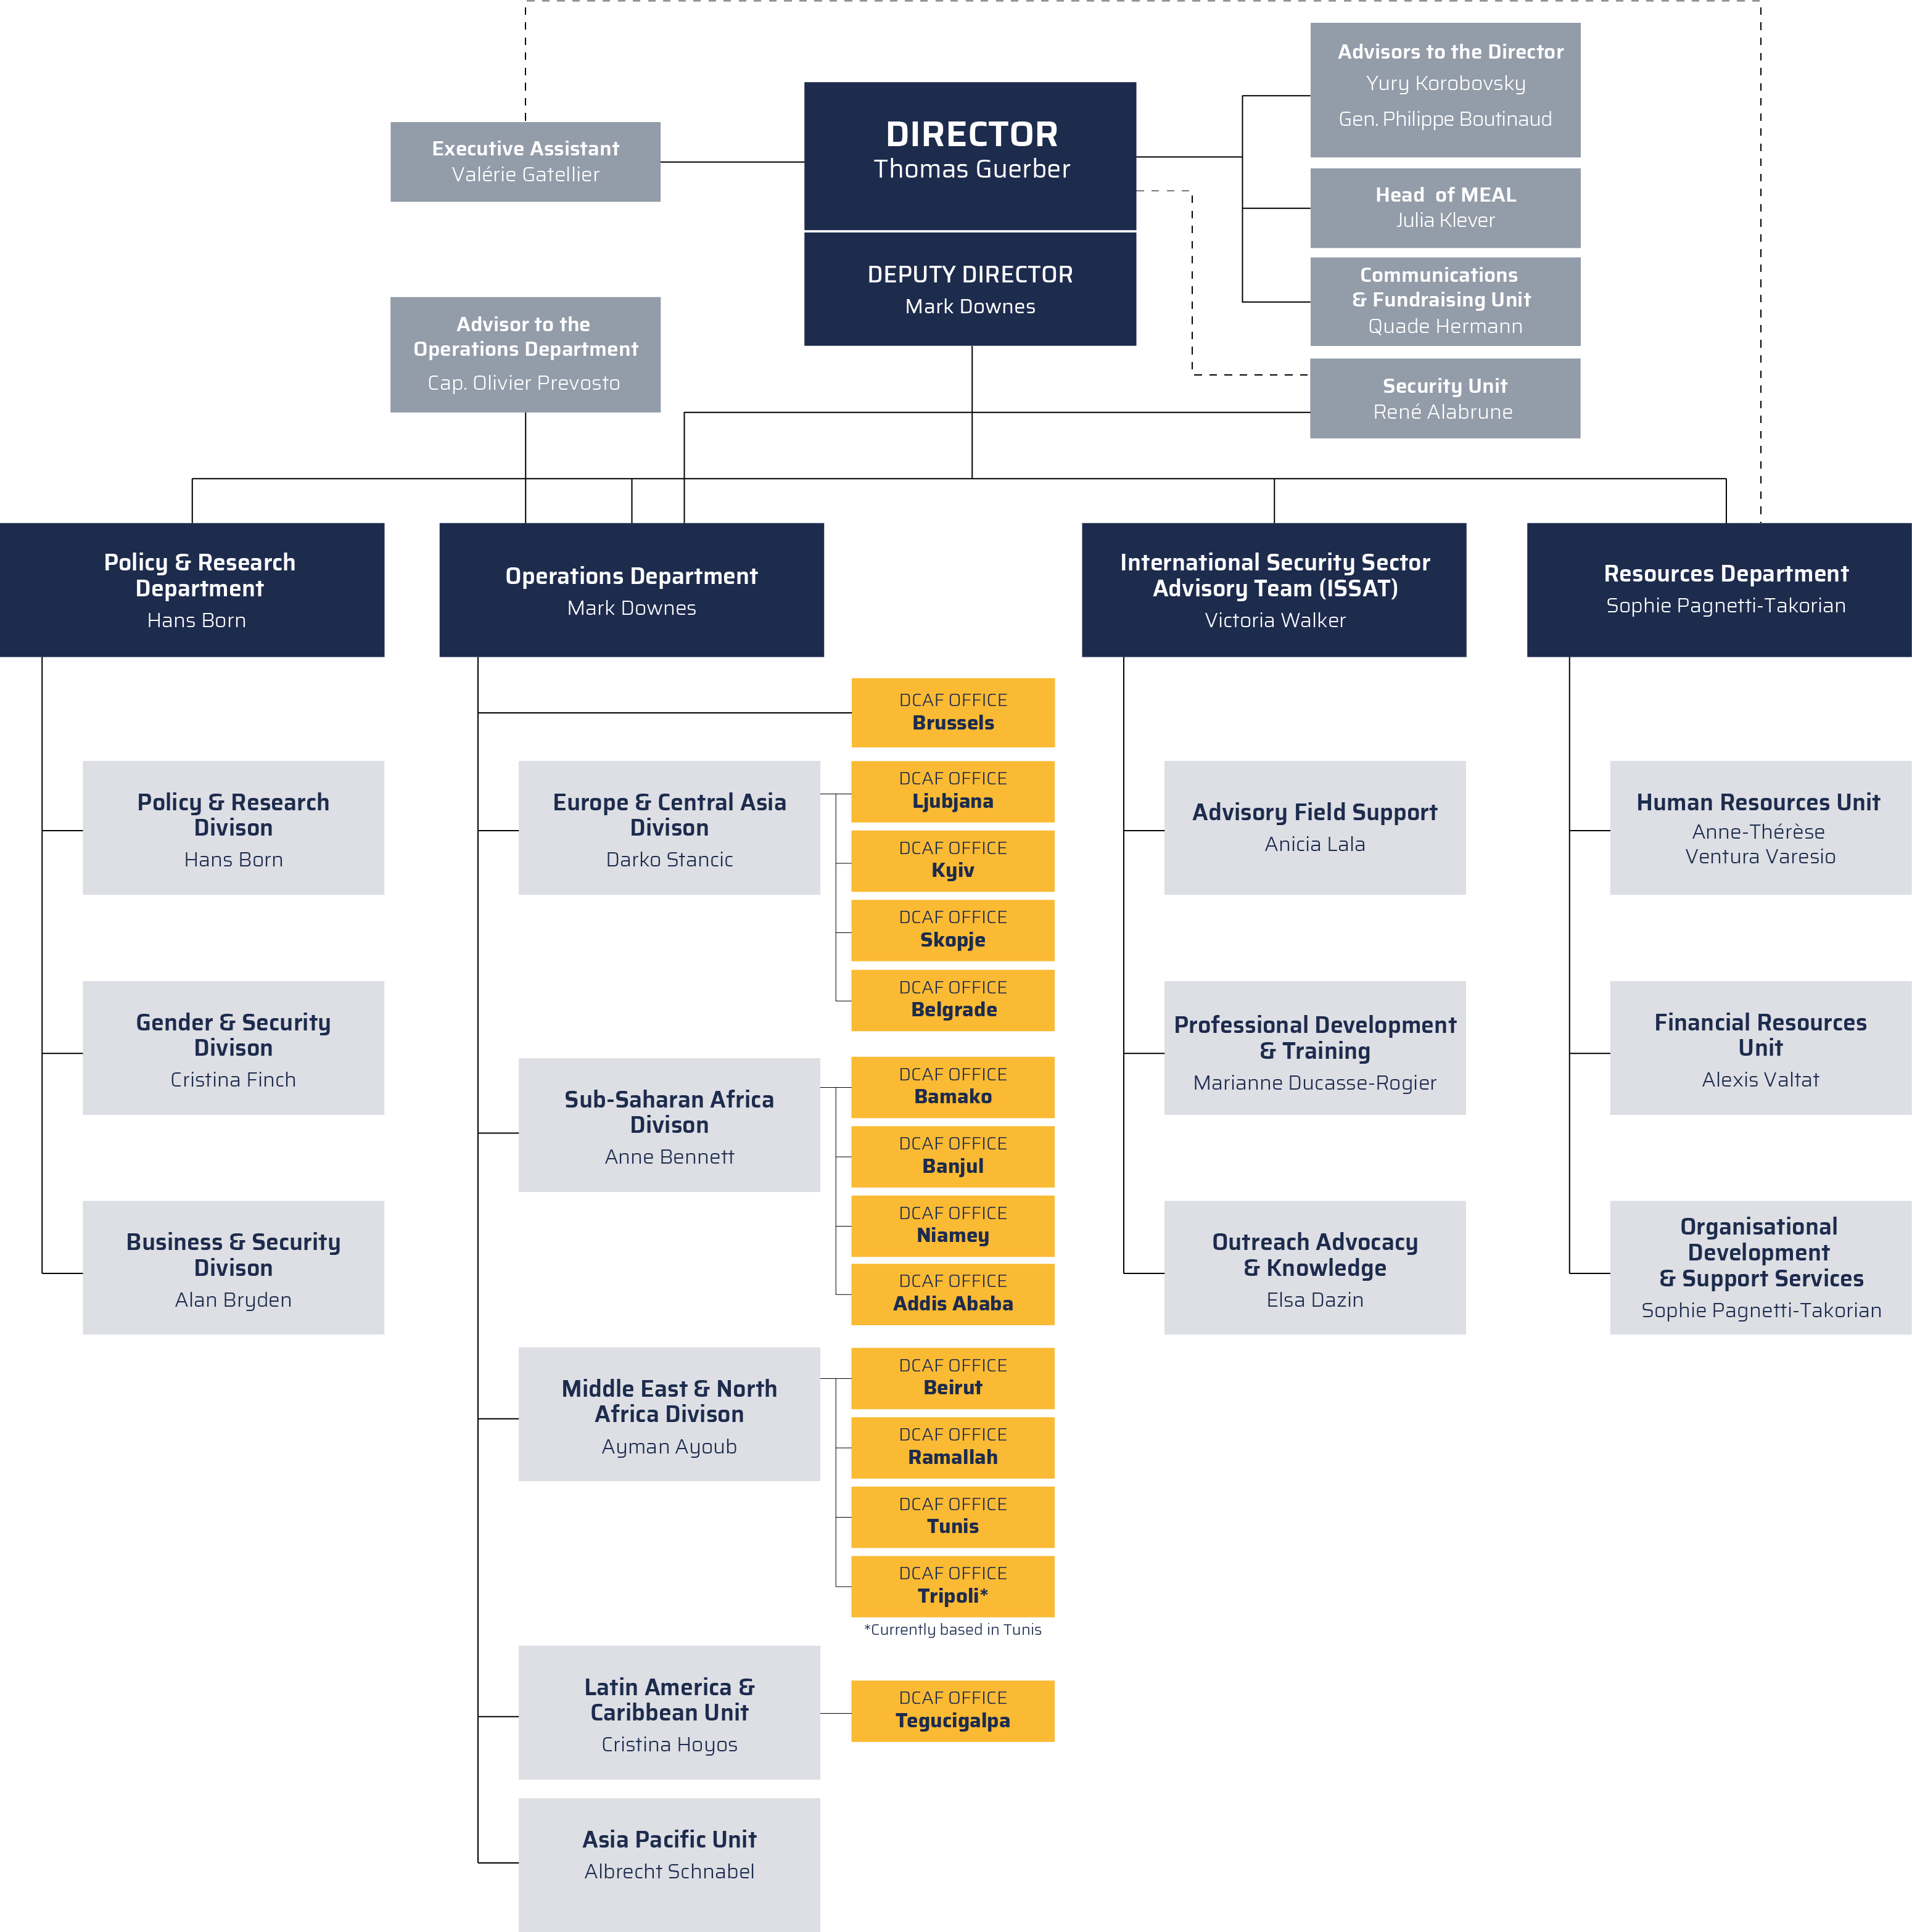 Organisation_Structure_May2022.png 